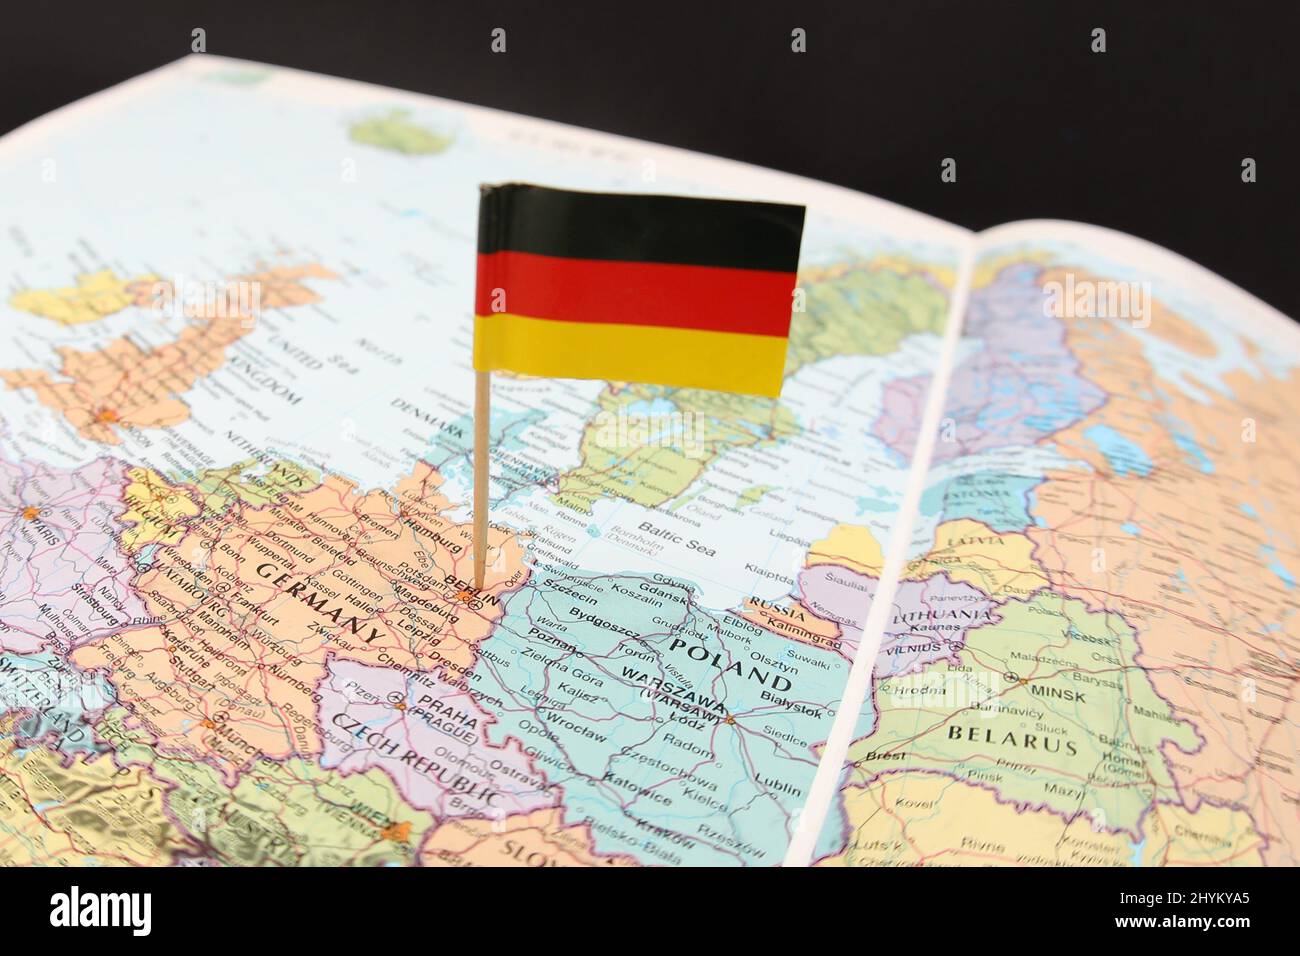 The German national flag sticking out of a close up image of a map or atlas focusing on Western Europe. The country of Germany with its neighbors. Stock Photo